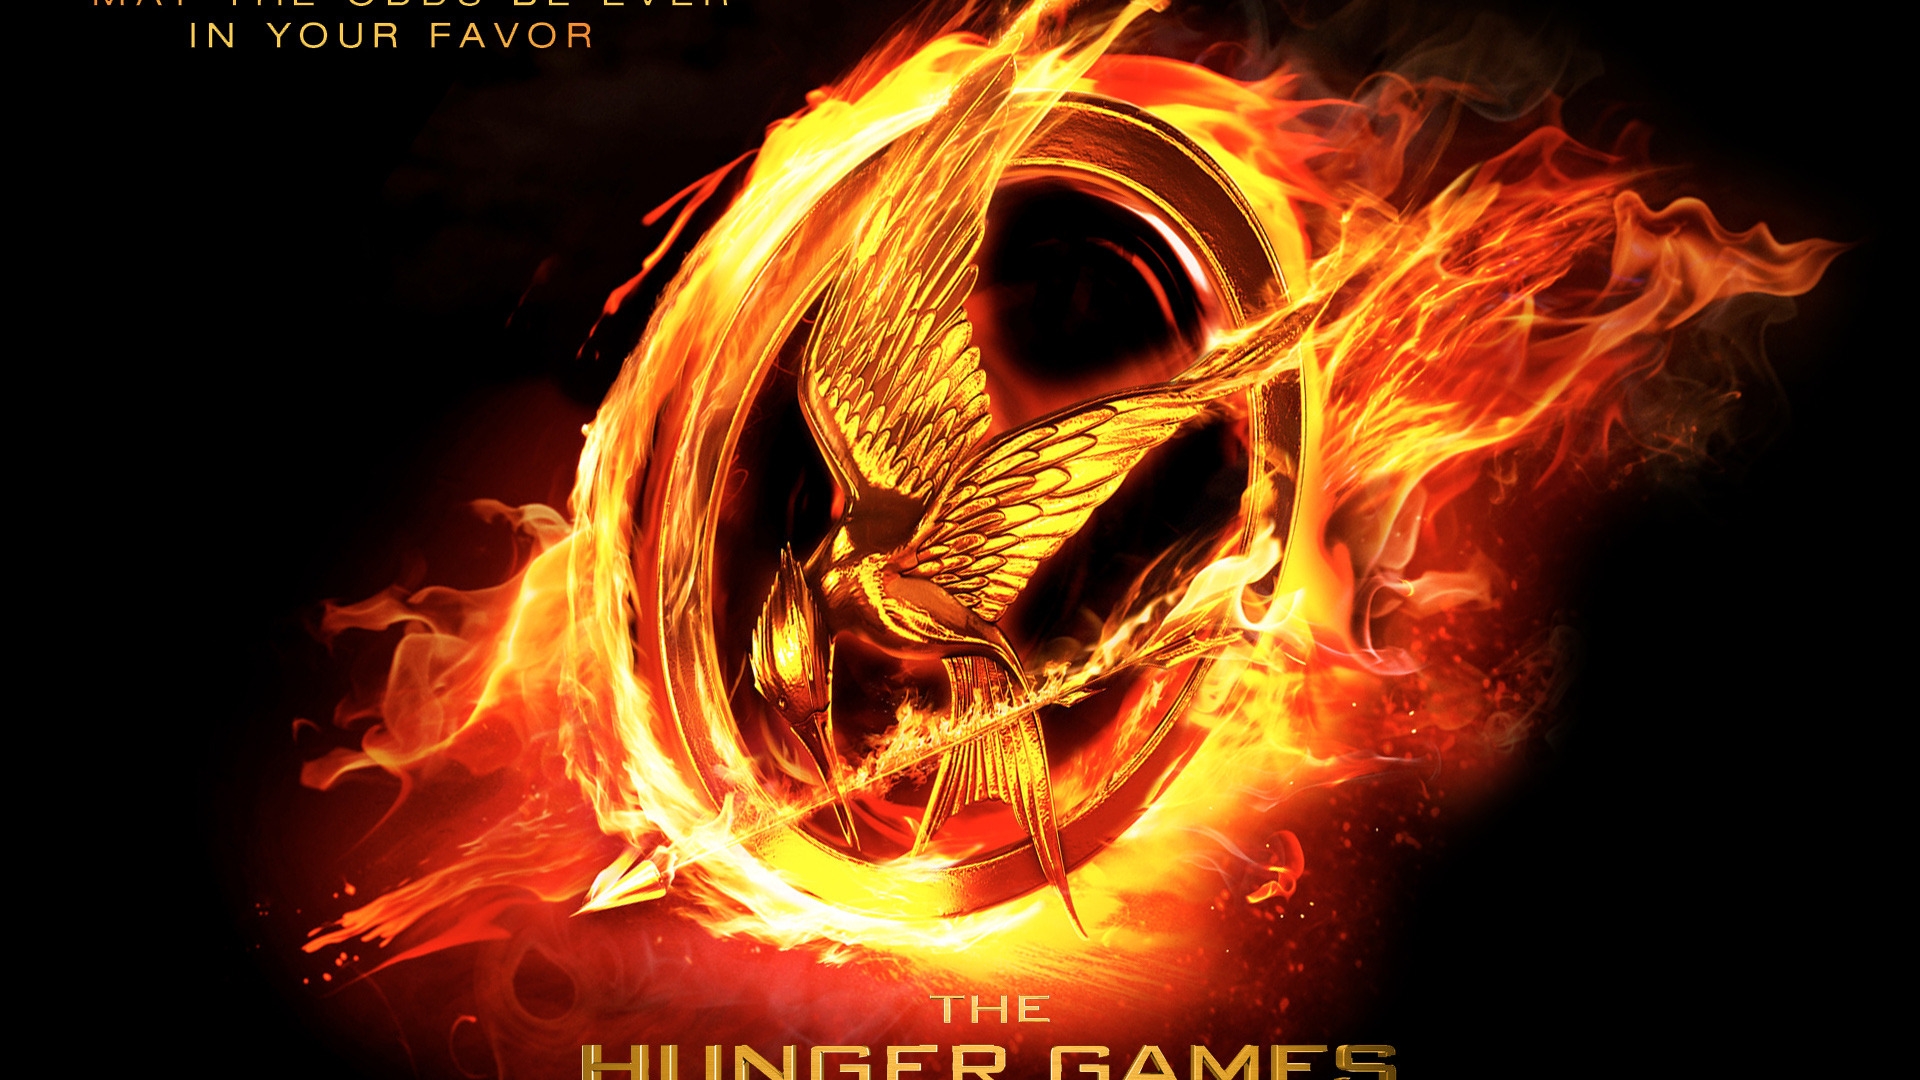 The Hunger Games Movie for 1920 x 1080 HDTV 1080p resolution